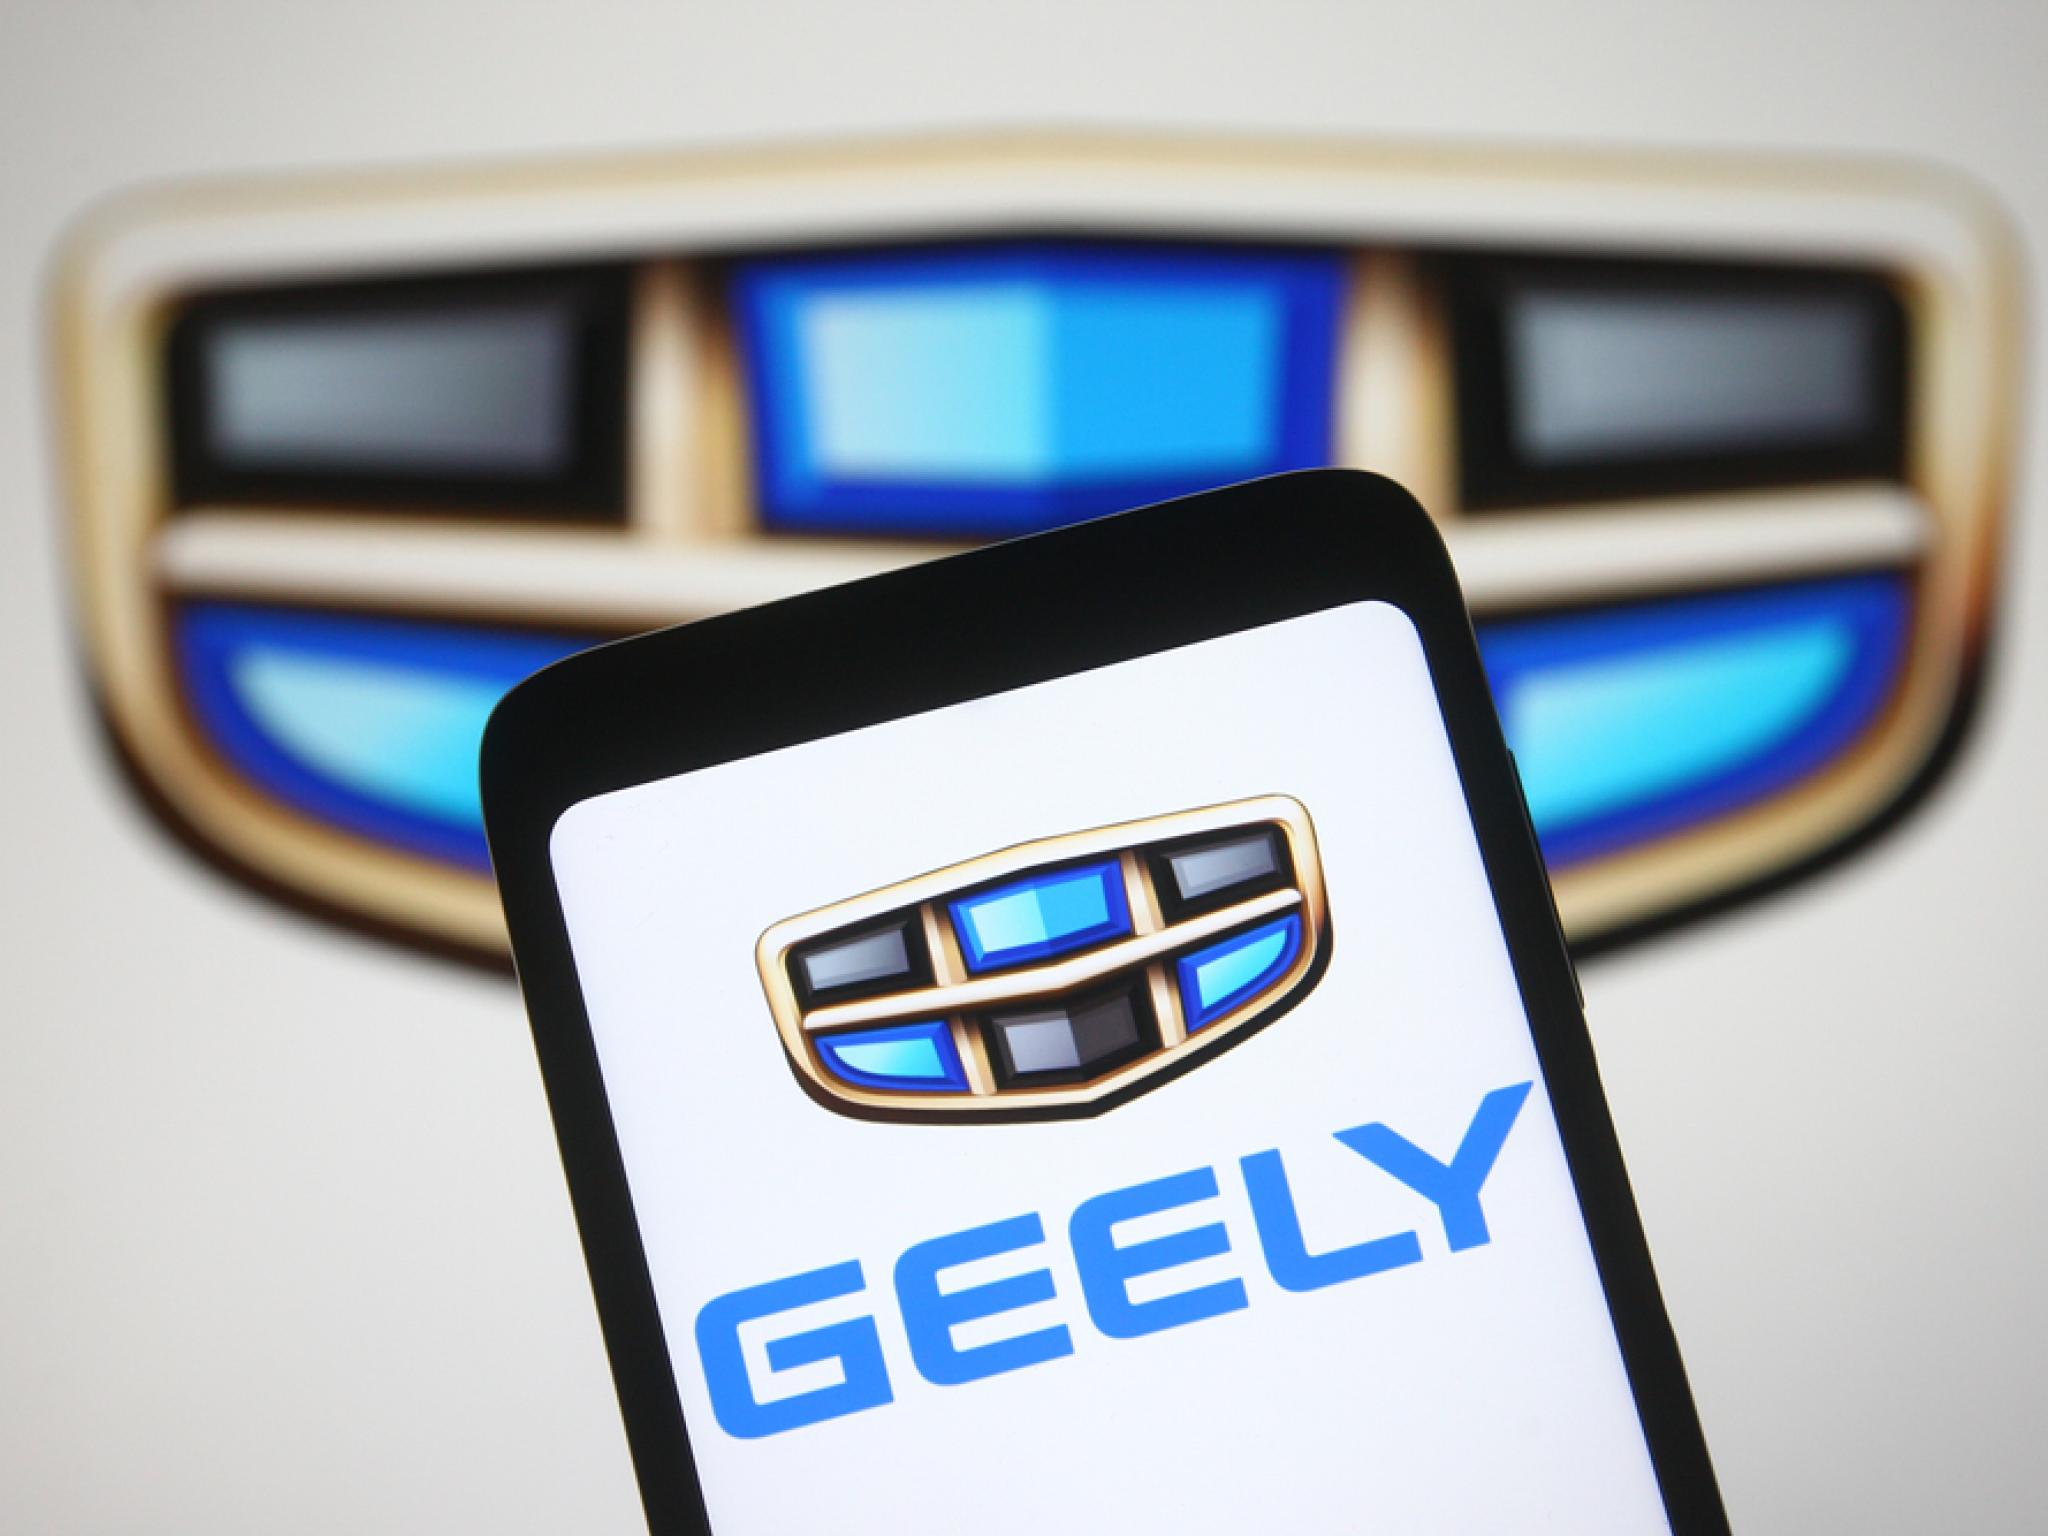  chinas-auto-giants-geely-and-nio-team-up-to-strengthen-battery-swapping-network 